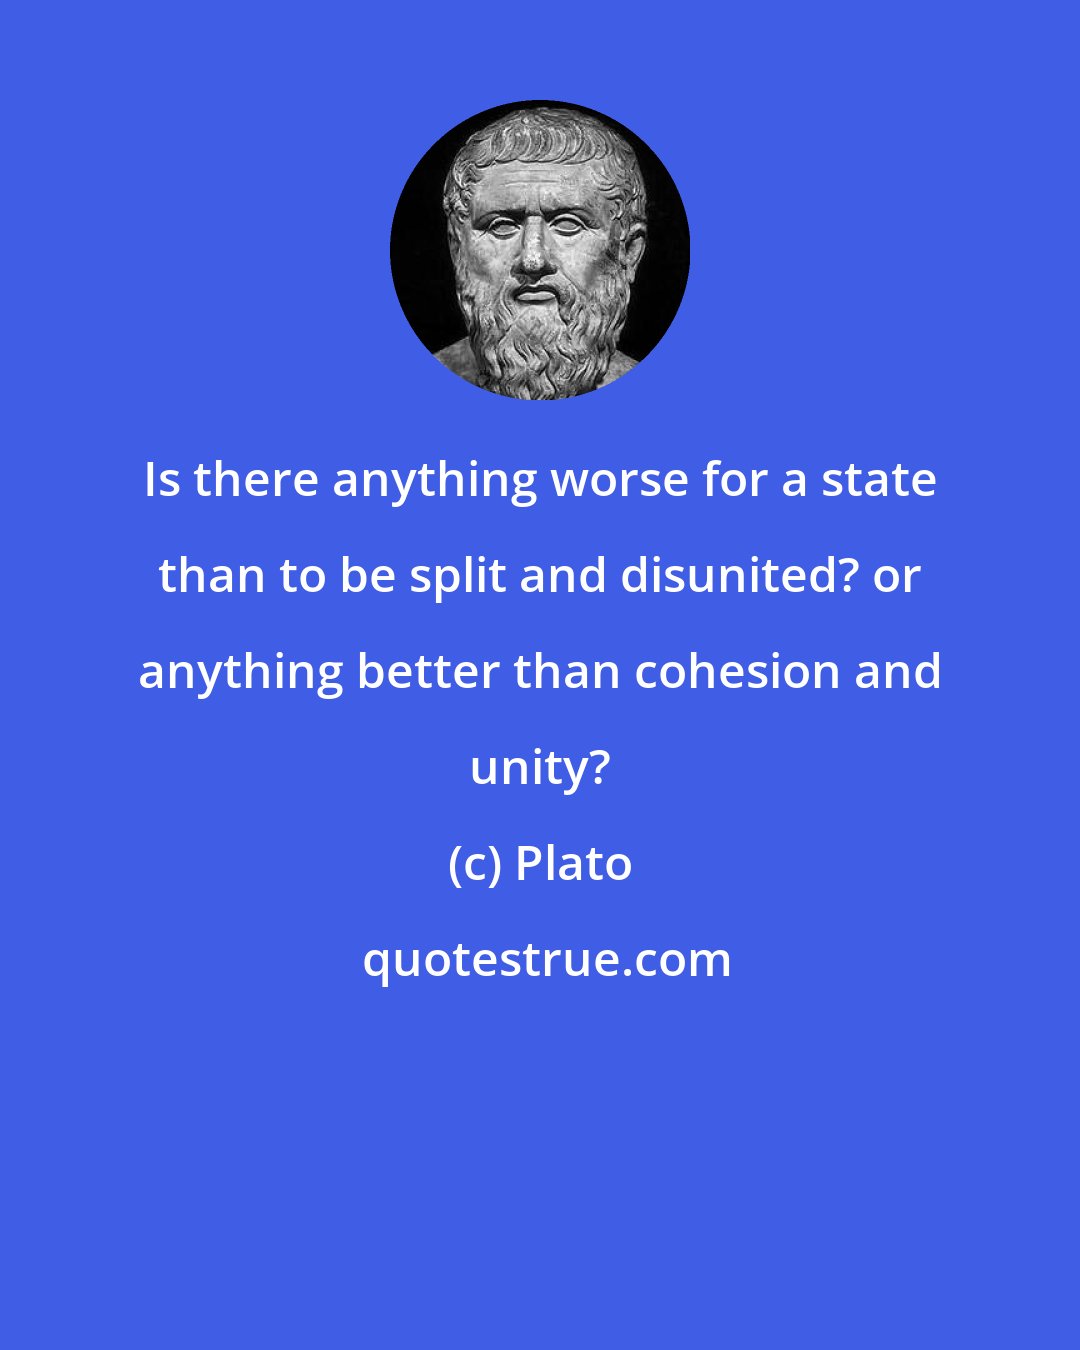 Plato: Is there anything worse for a state than to be split and disunited? or anything better than cohesion and unity?